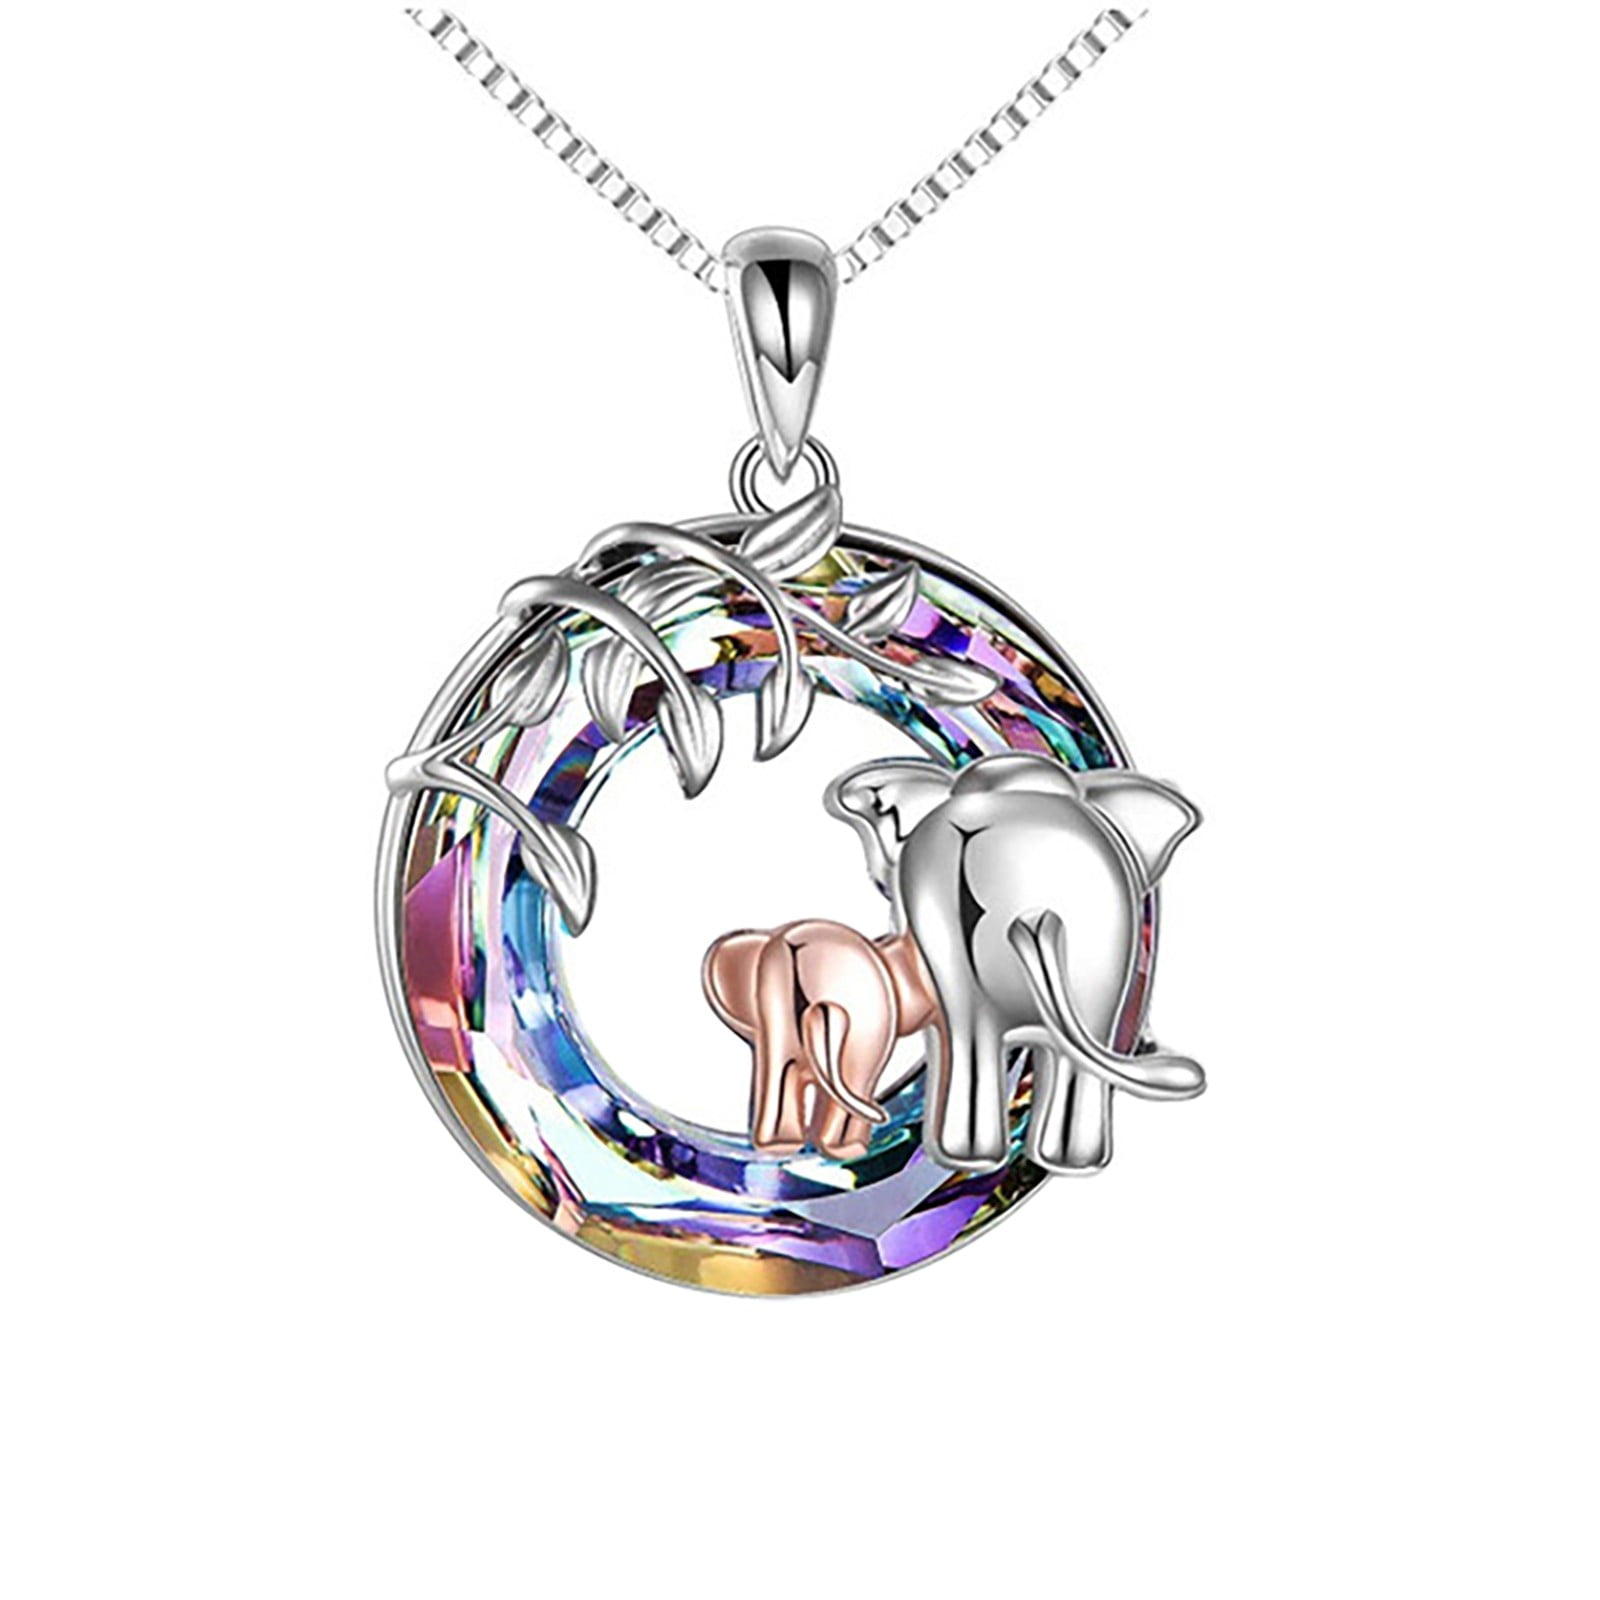 Details about   Women Cute Lucky Double CZ Elephant 925 Sterling Silver Chain Necklace 16-18"